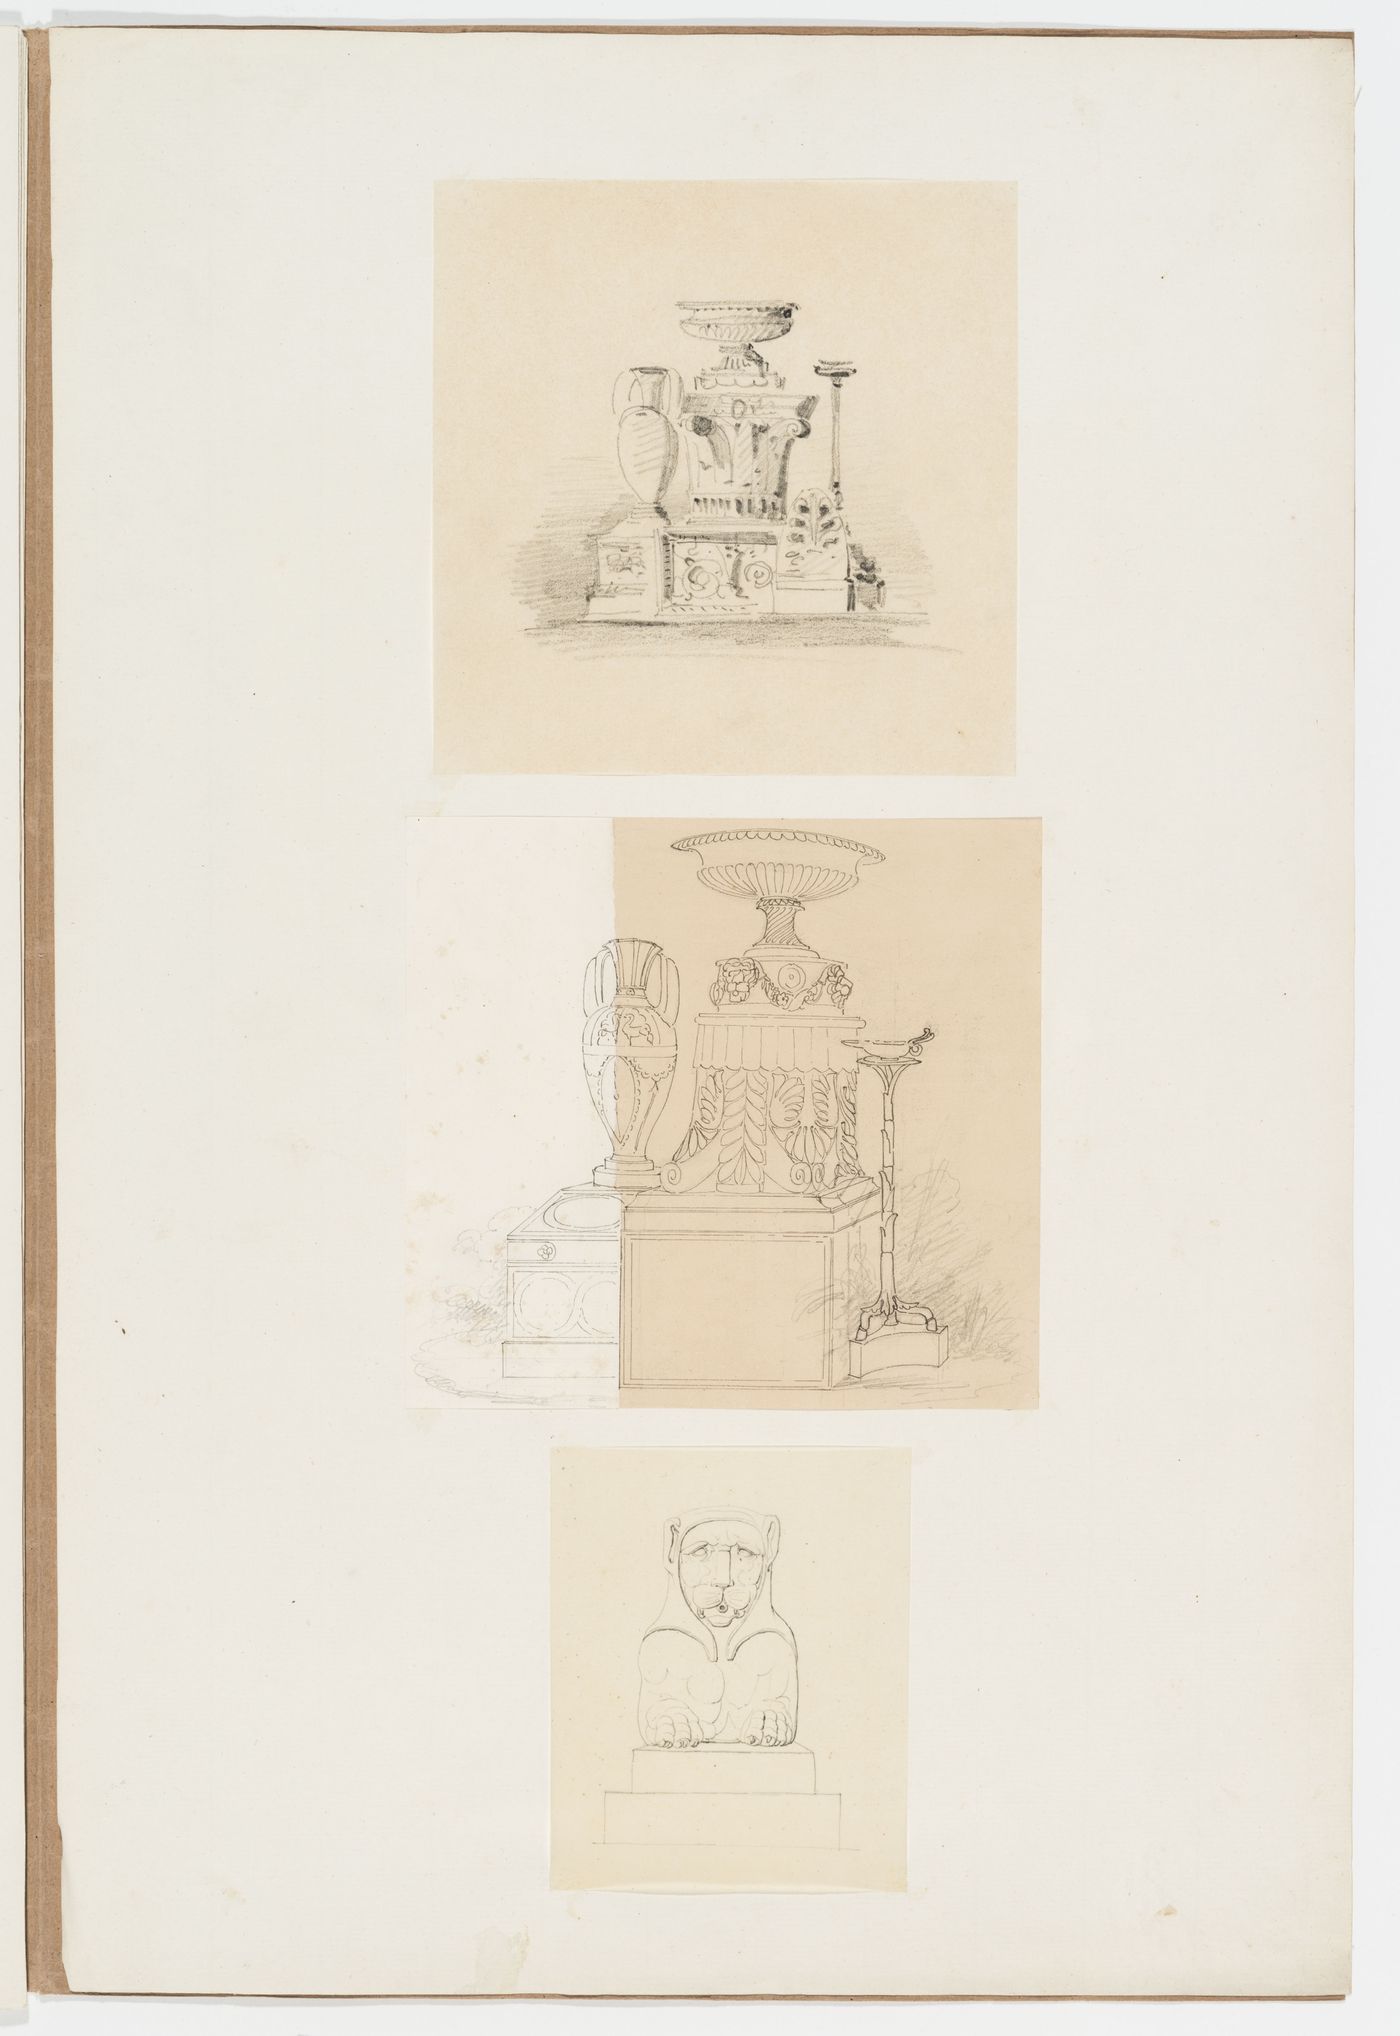 Sketches of vases, capitals and pedestals; Sketch of a sculpture [?] of a mythical animal